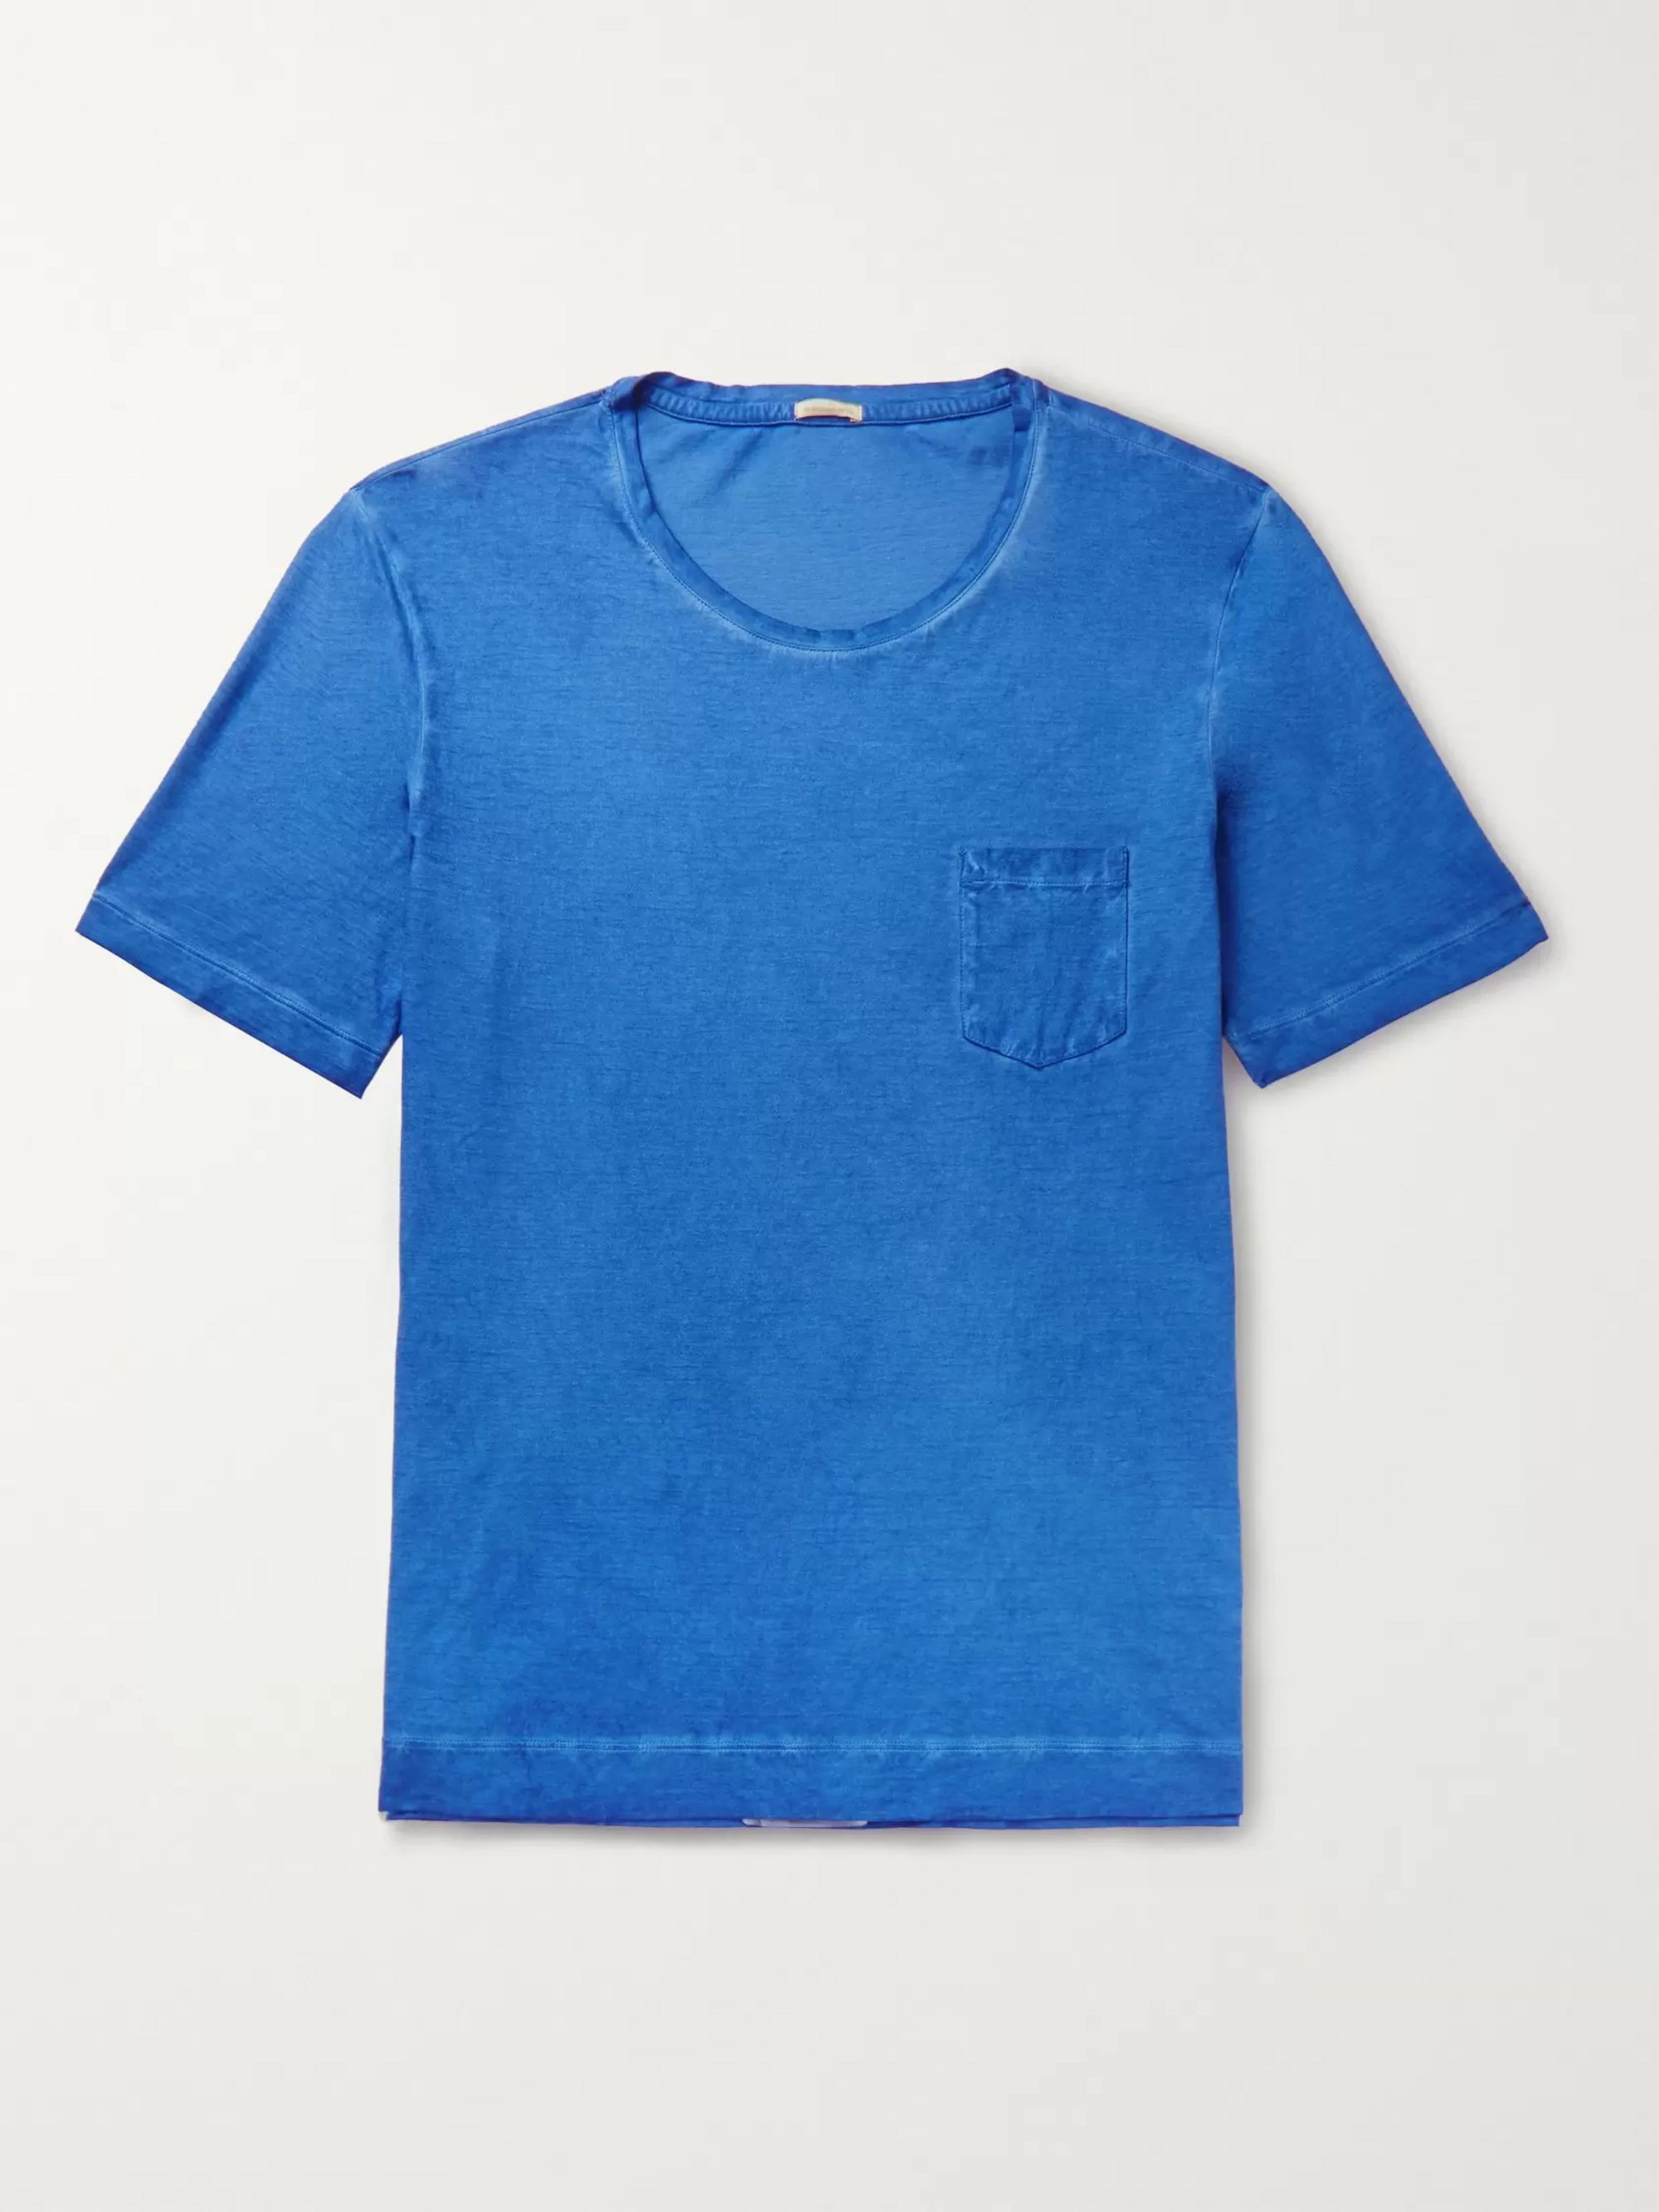 Watercolour Dyed Cotton Jersey T Shirt by Massimo Alba